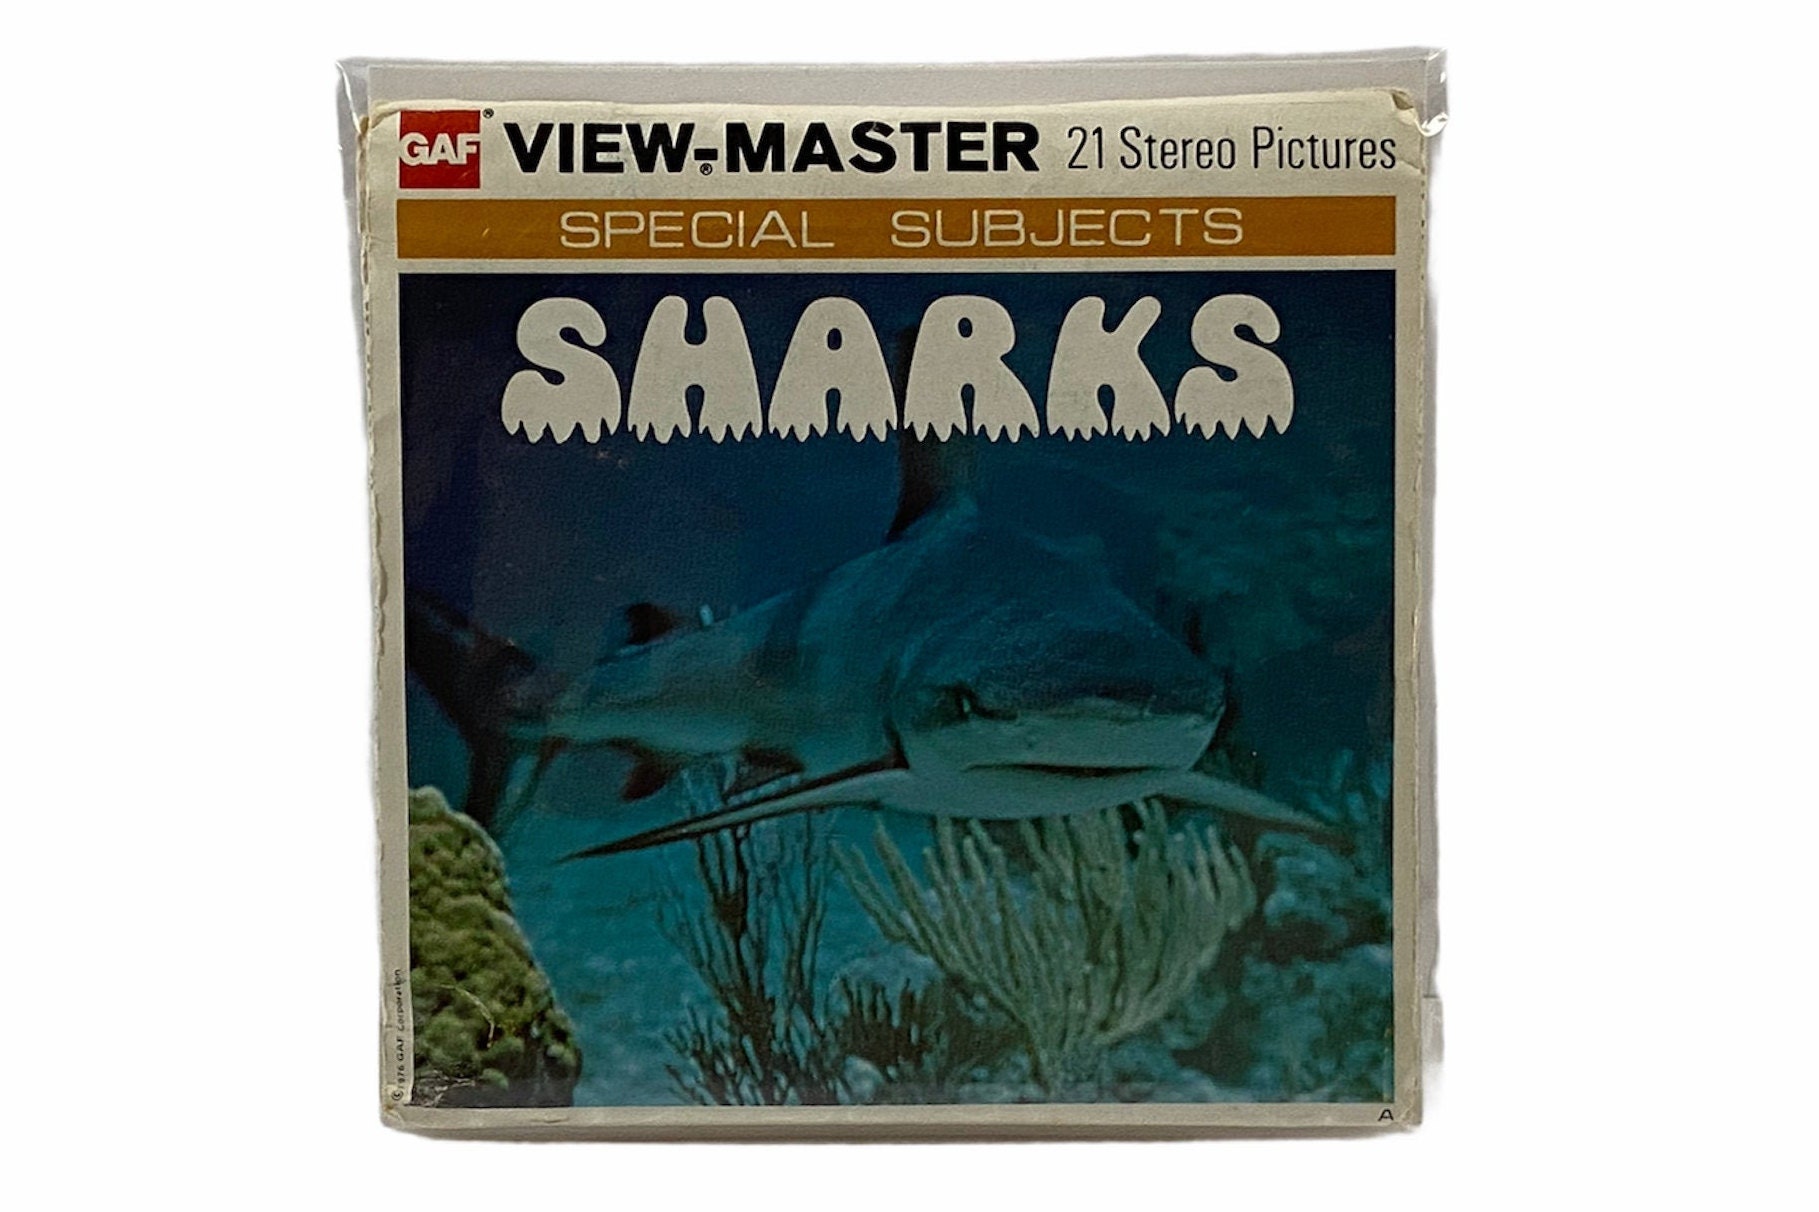 SHARKS- View-Master Reel Set - Special Subjects Series - GAF - G5 Packet -  B621 - 1975